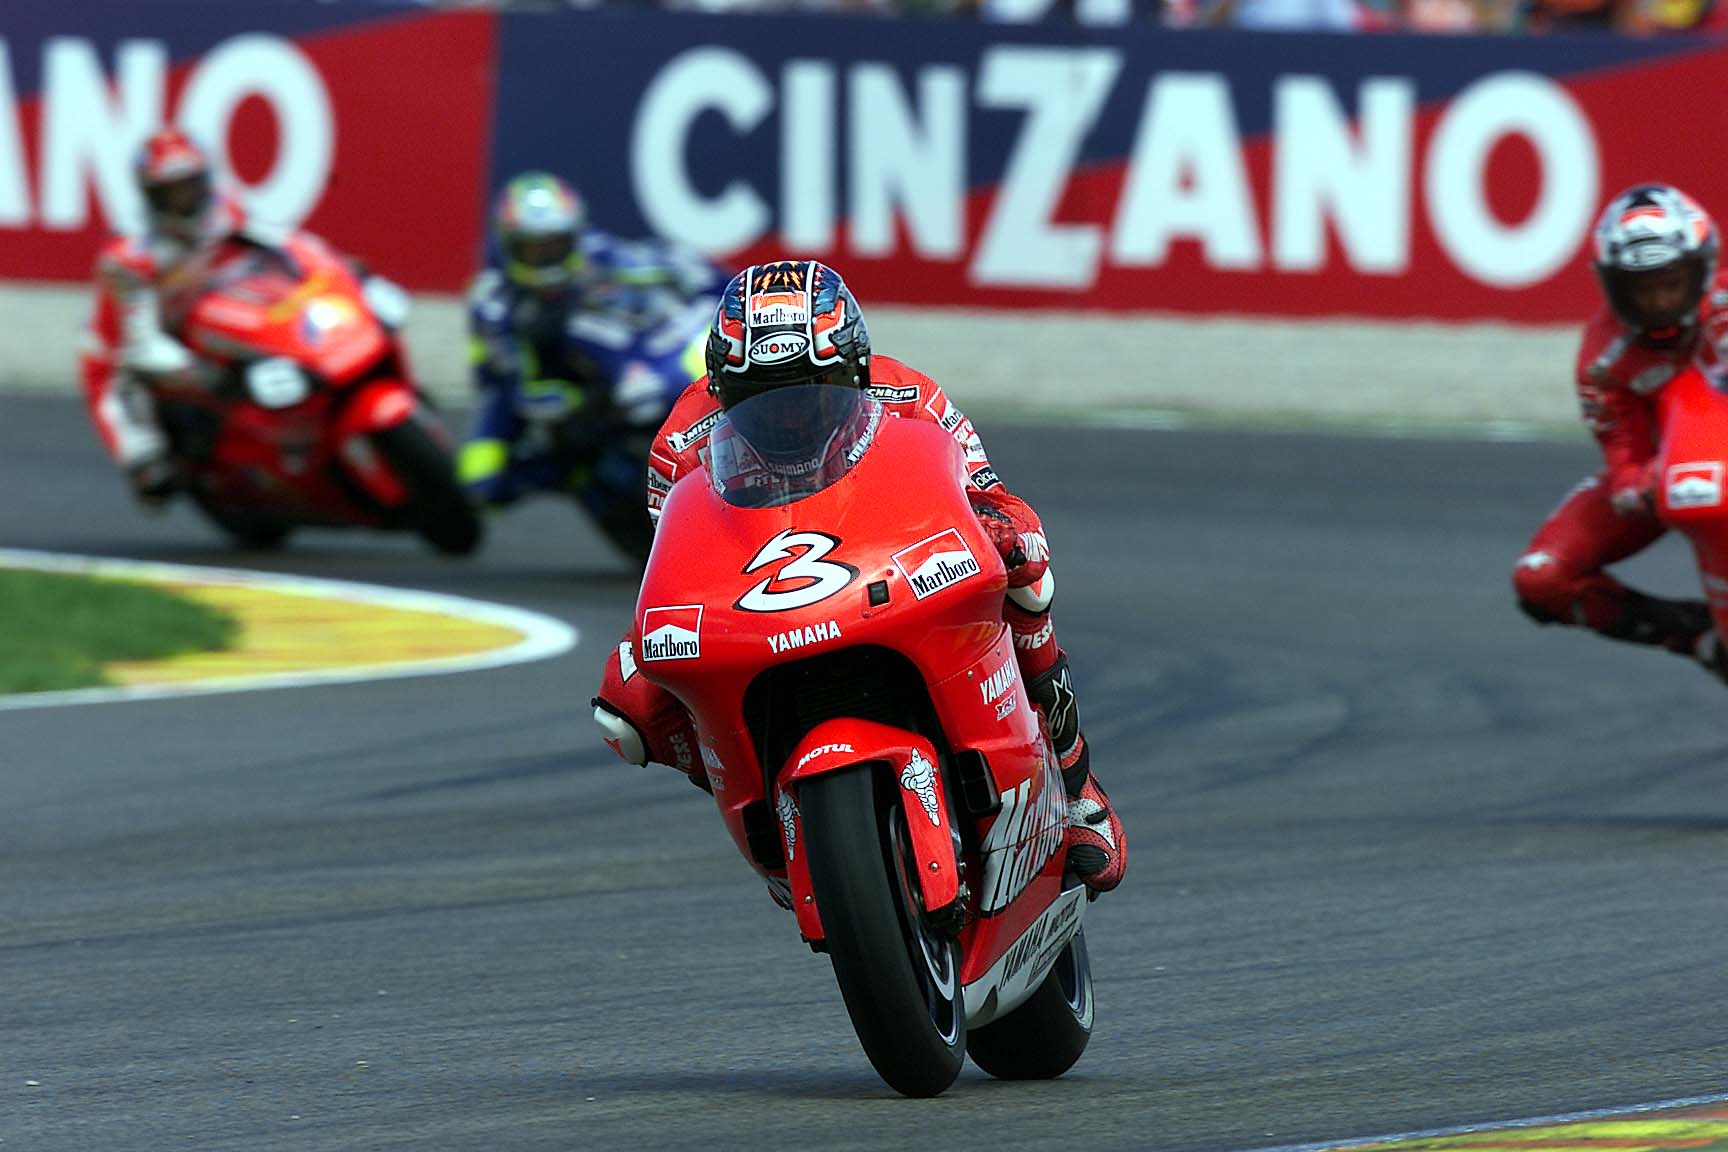 Top 10 MotoGP race winners never to take the title